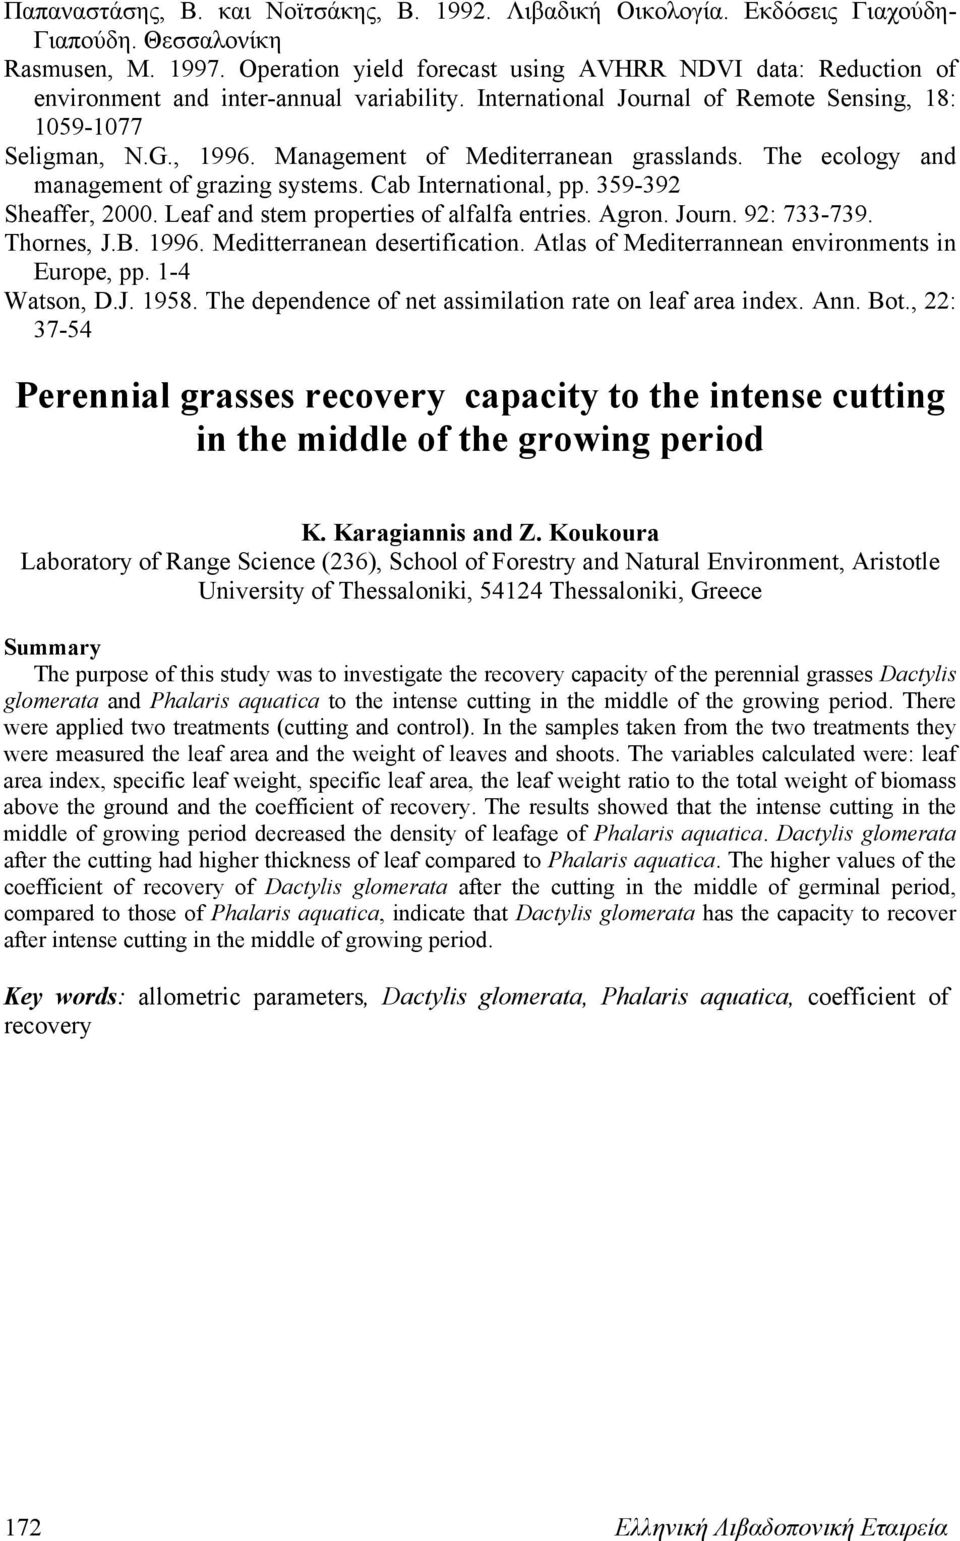 Management of Mediterranean grasslands. The ecology and management of grazing systems. Cab International, pp. 359-392 Sheaffer, 2000. Leaf and stem properties of alfalfa entries. Agron. Journ.